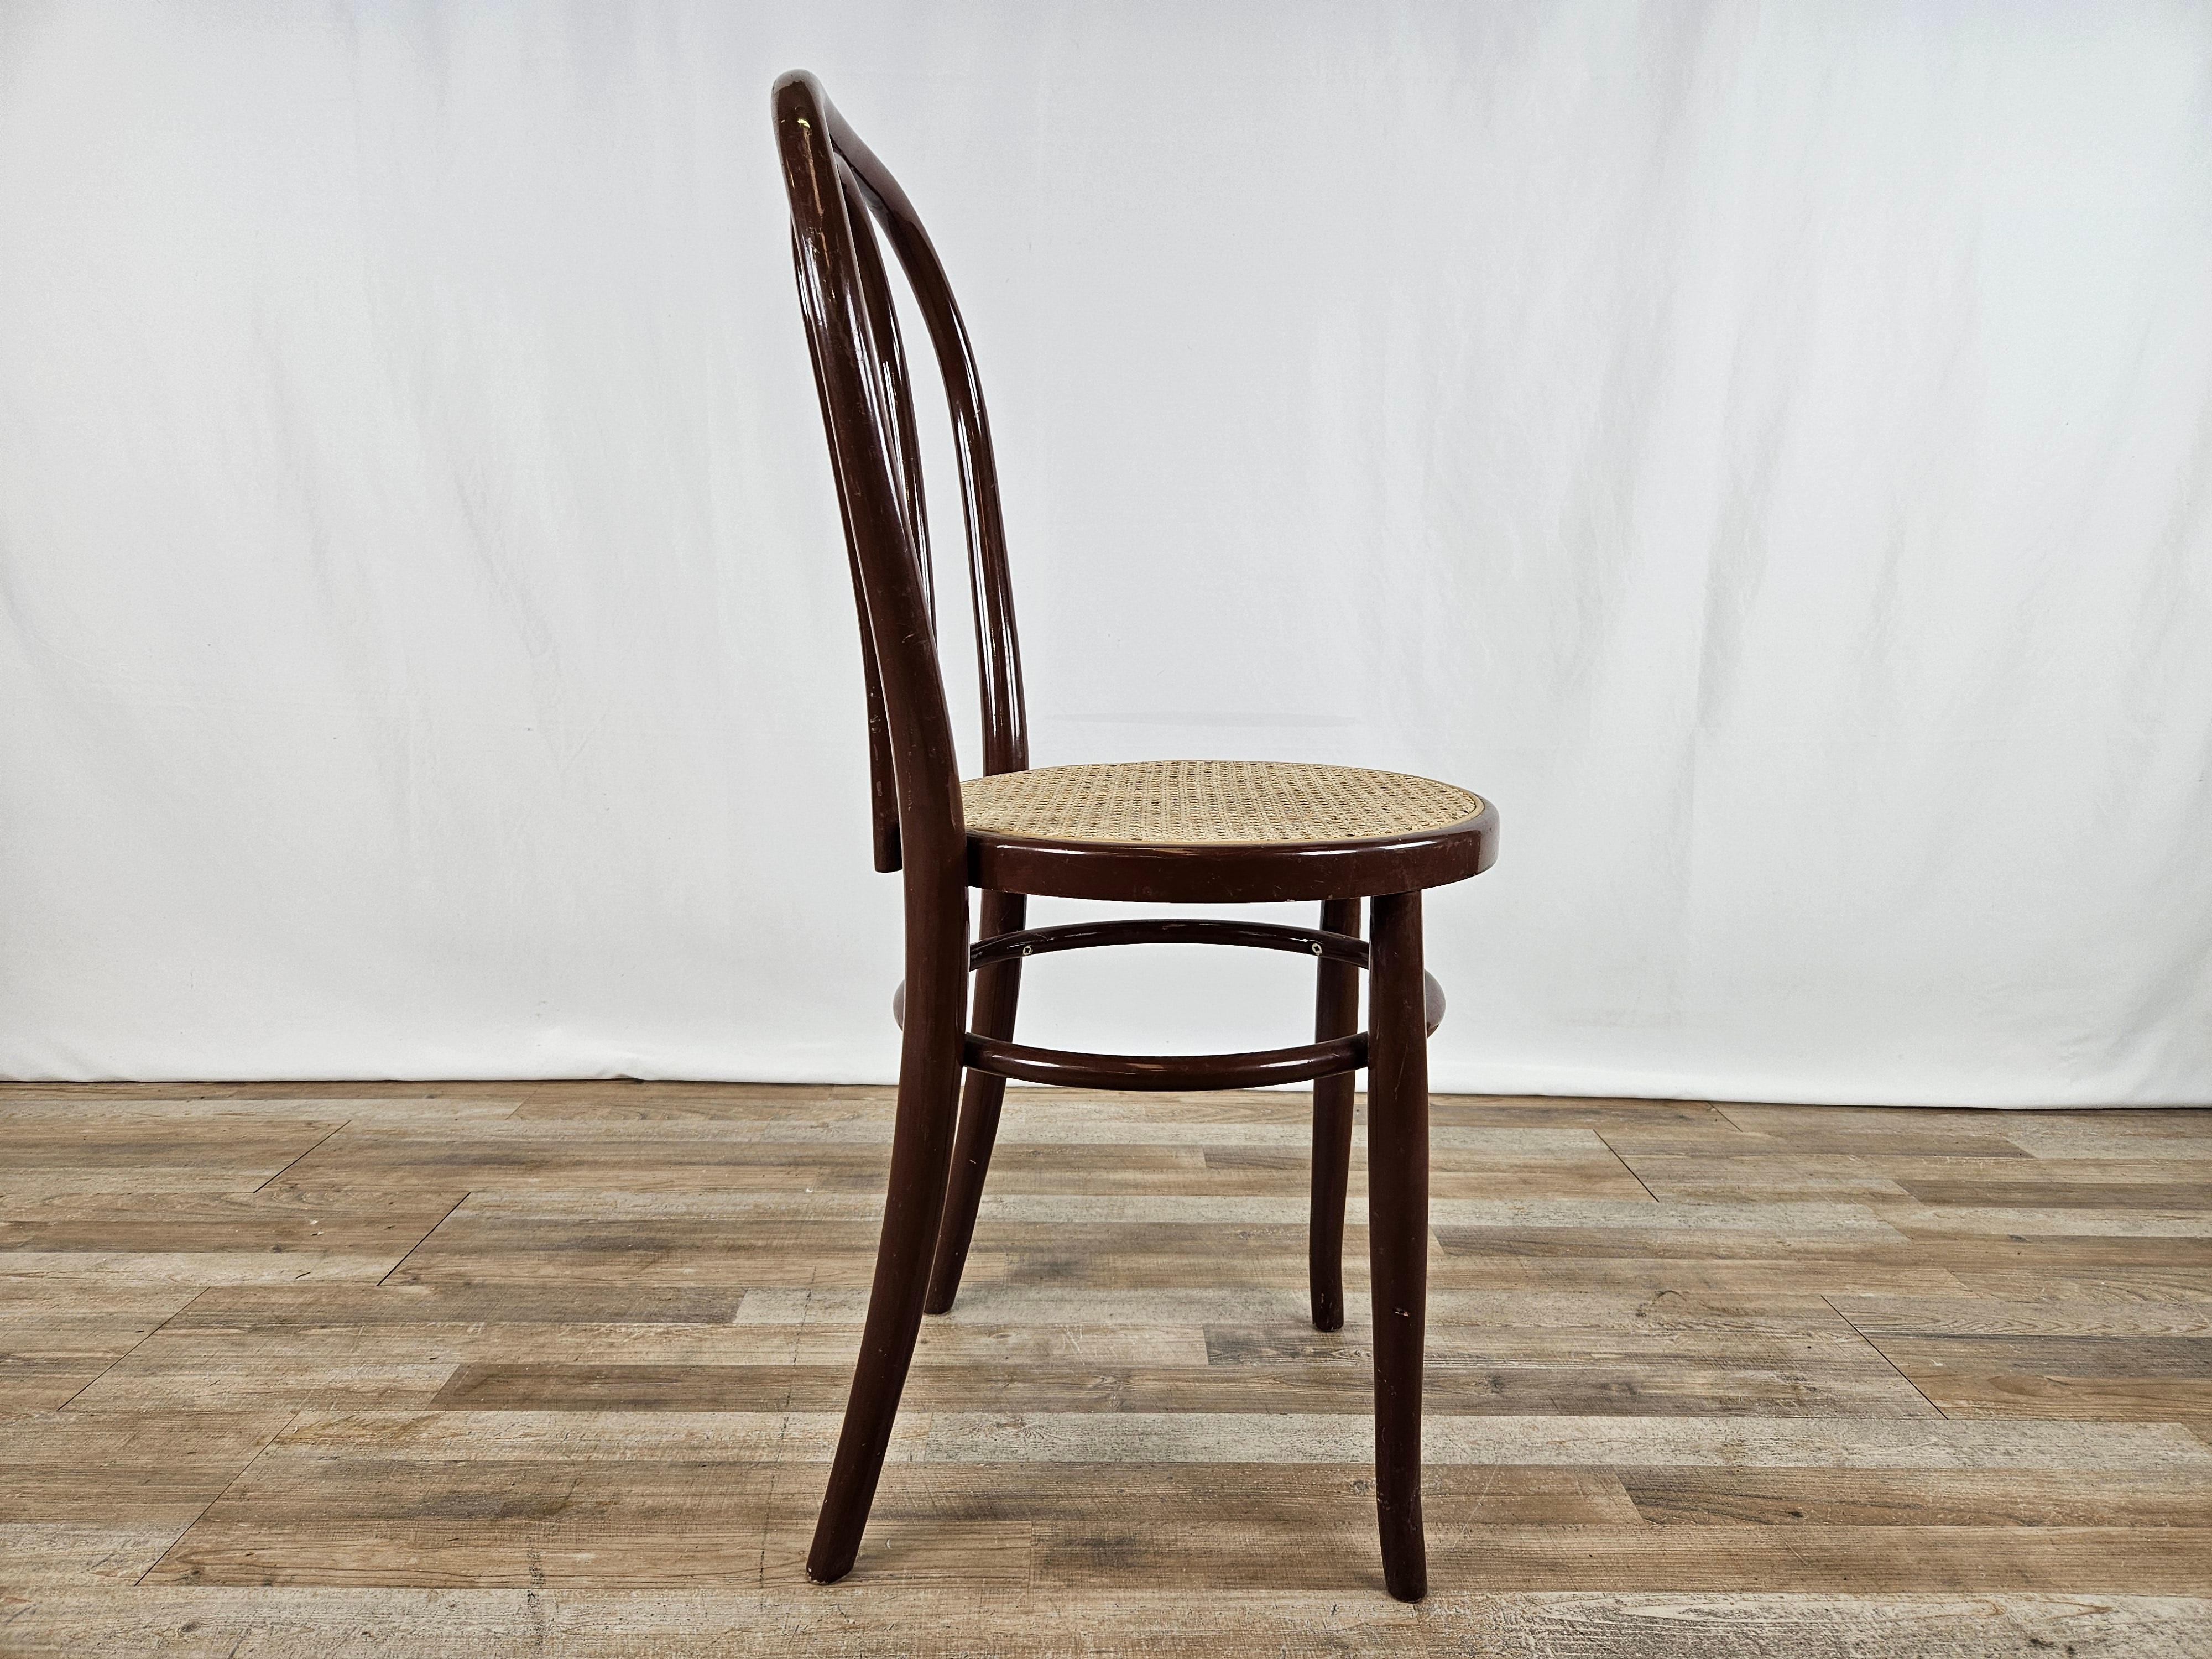 Brown lacquered wood chair with Vienna straw seat.

Ideal for kitchens, offices, living rooms or as furniture elements.

Normal signs due to age and use.